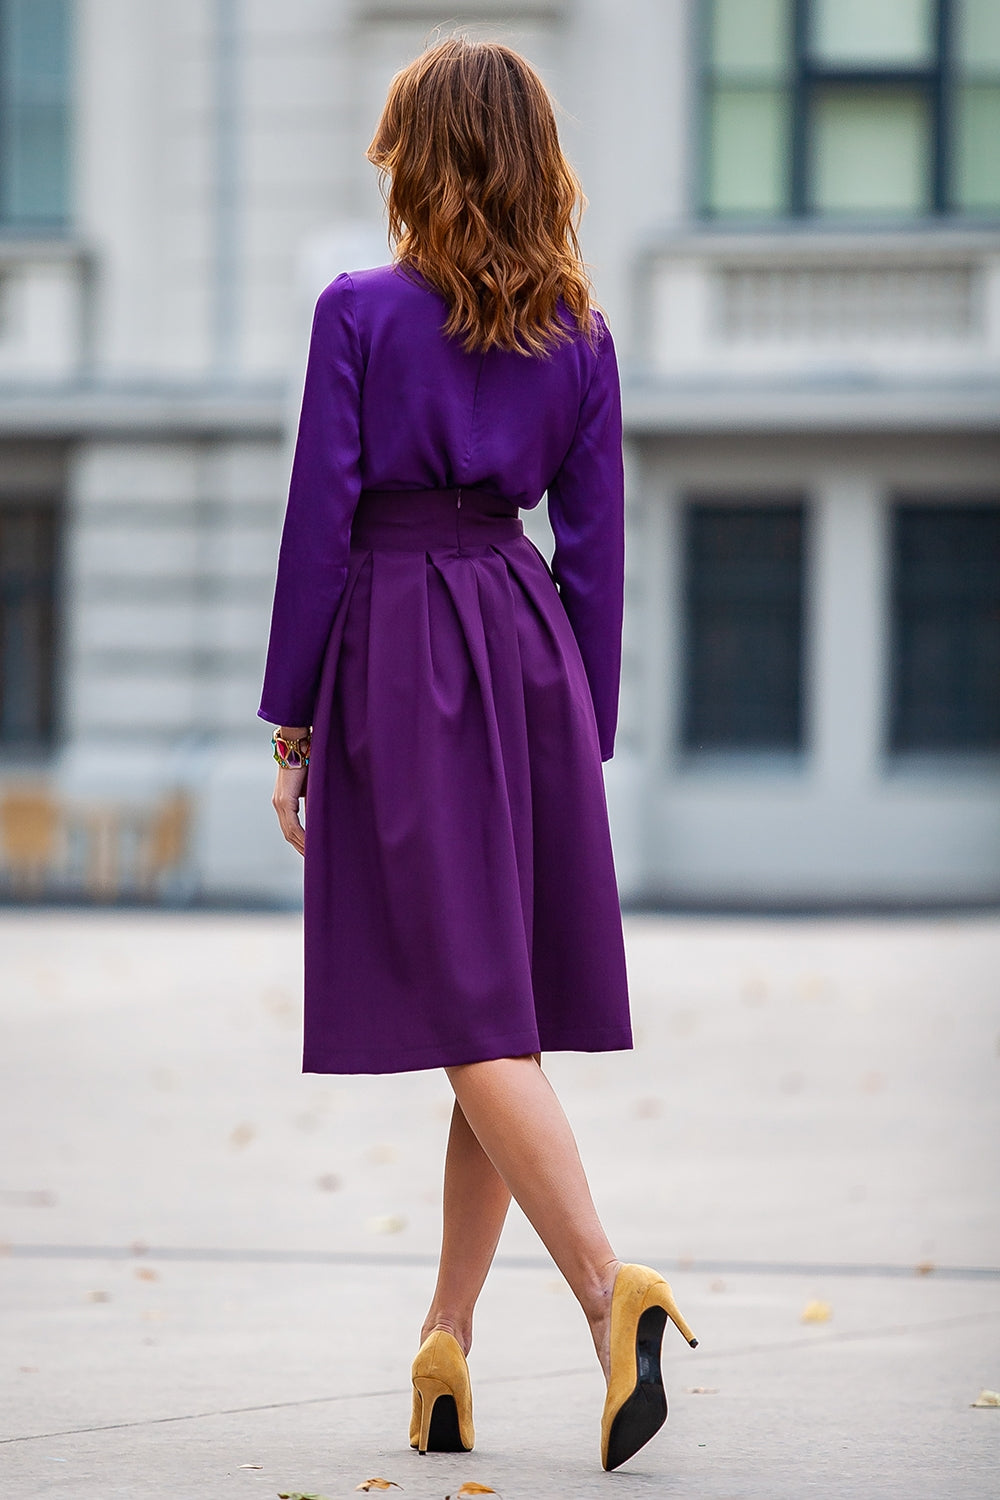 Dark purple flared skirts with side pockets